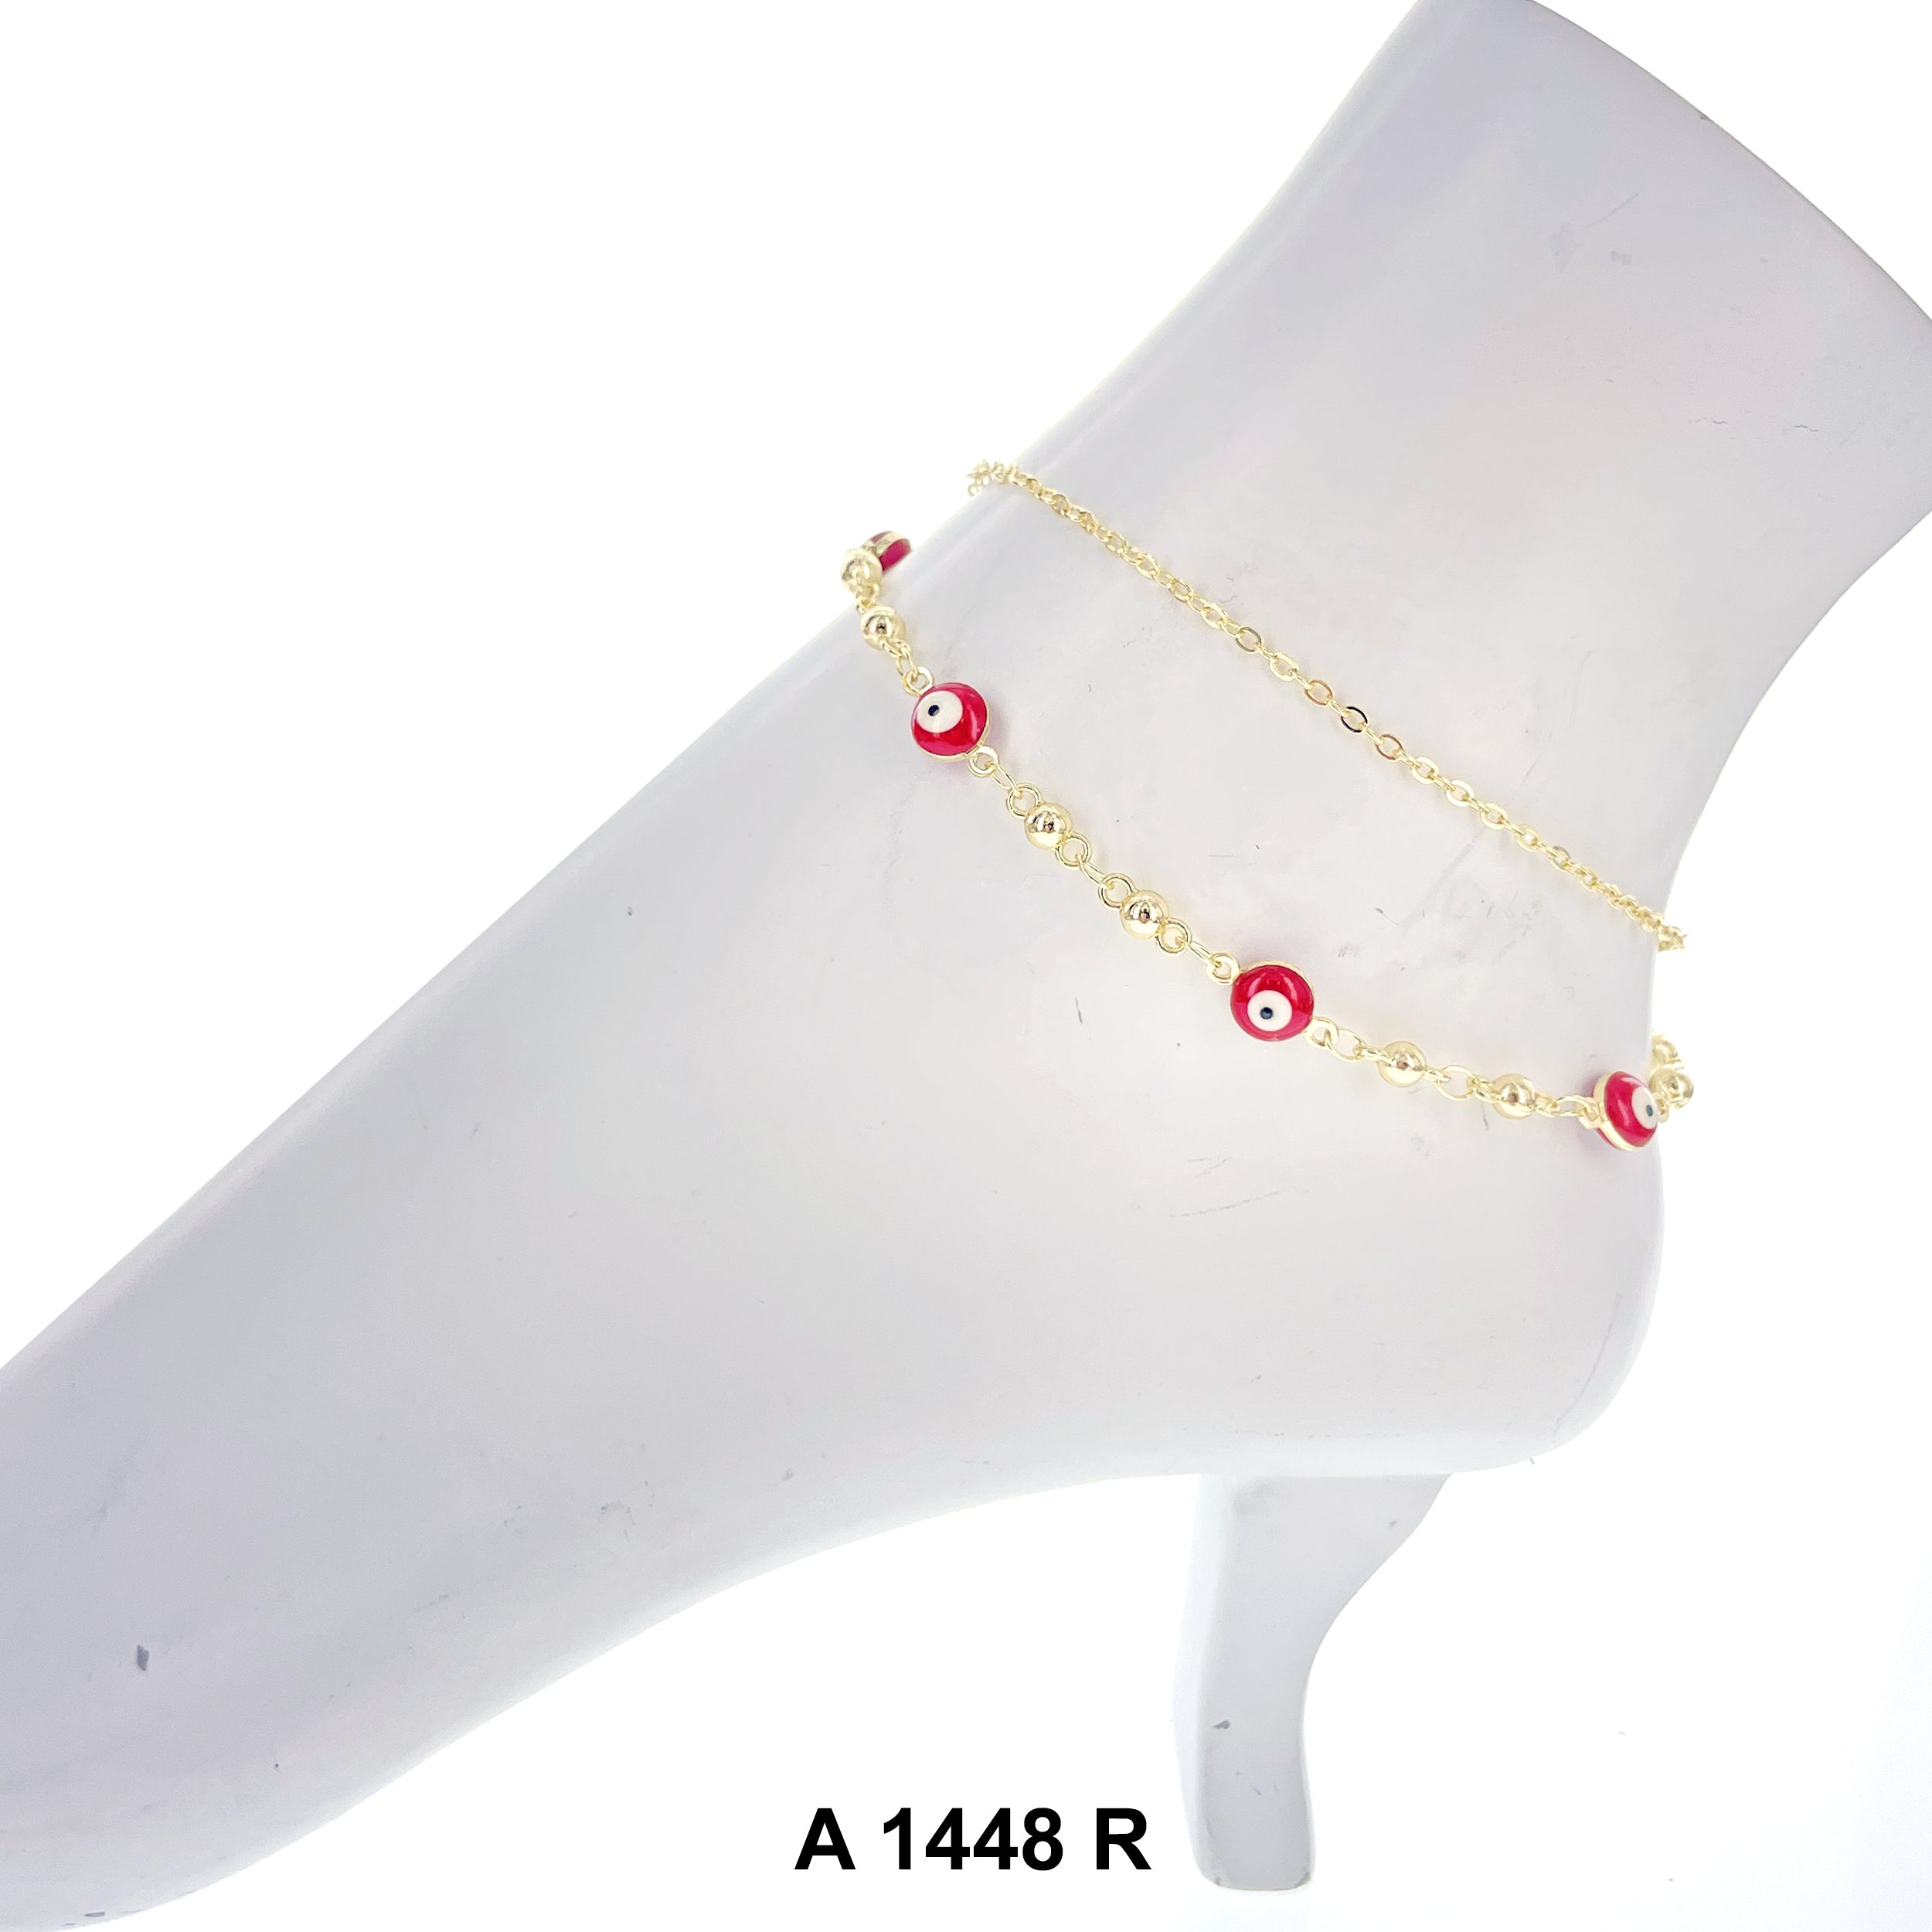 Fashion Anklets A 1448 R